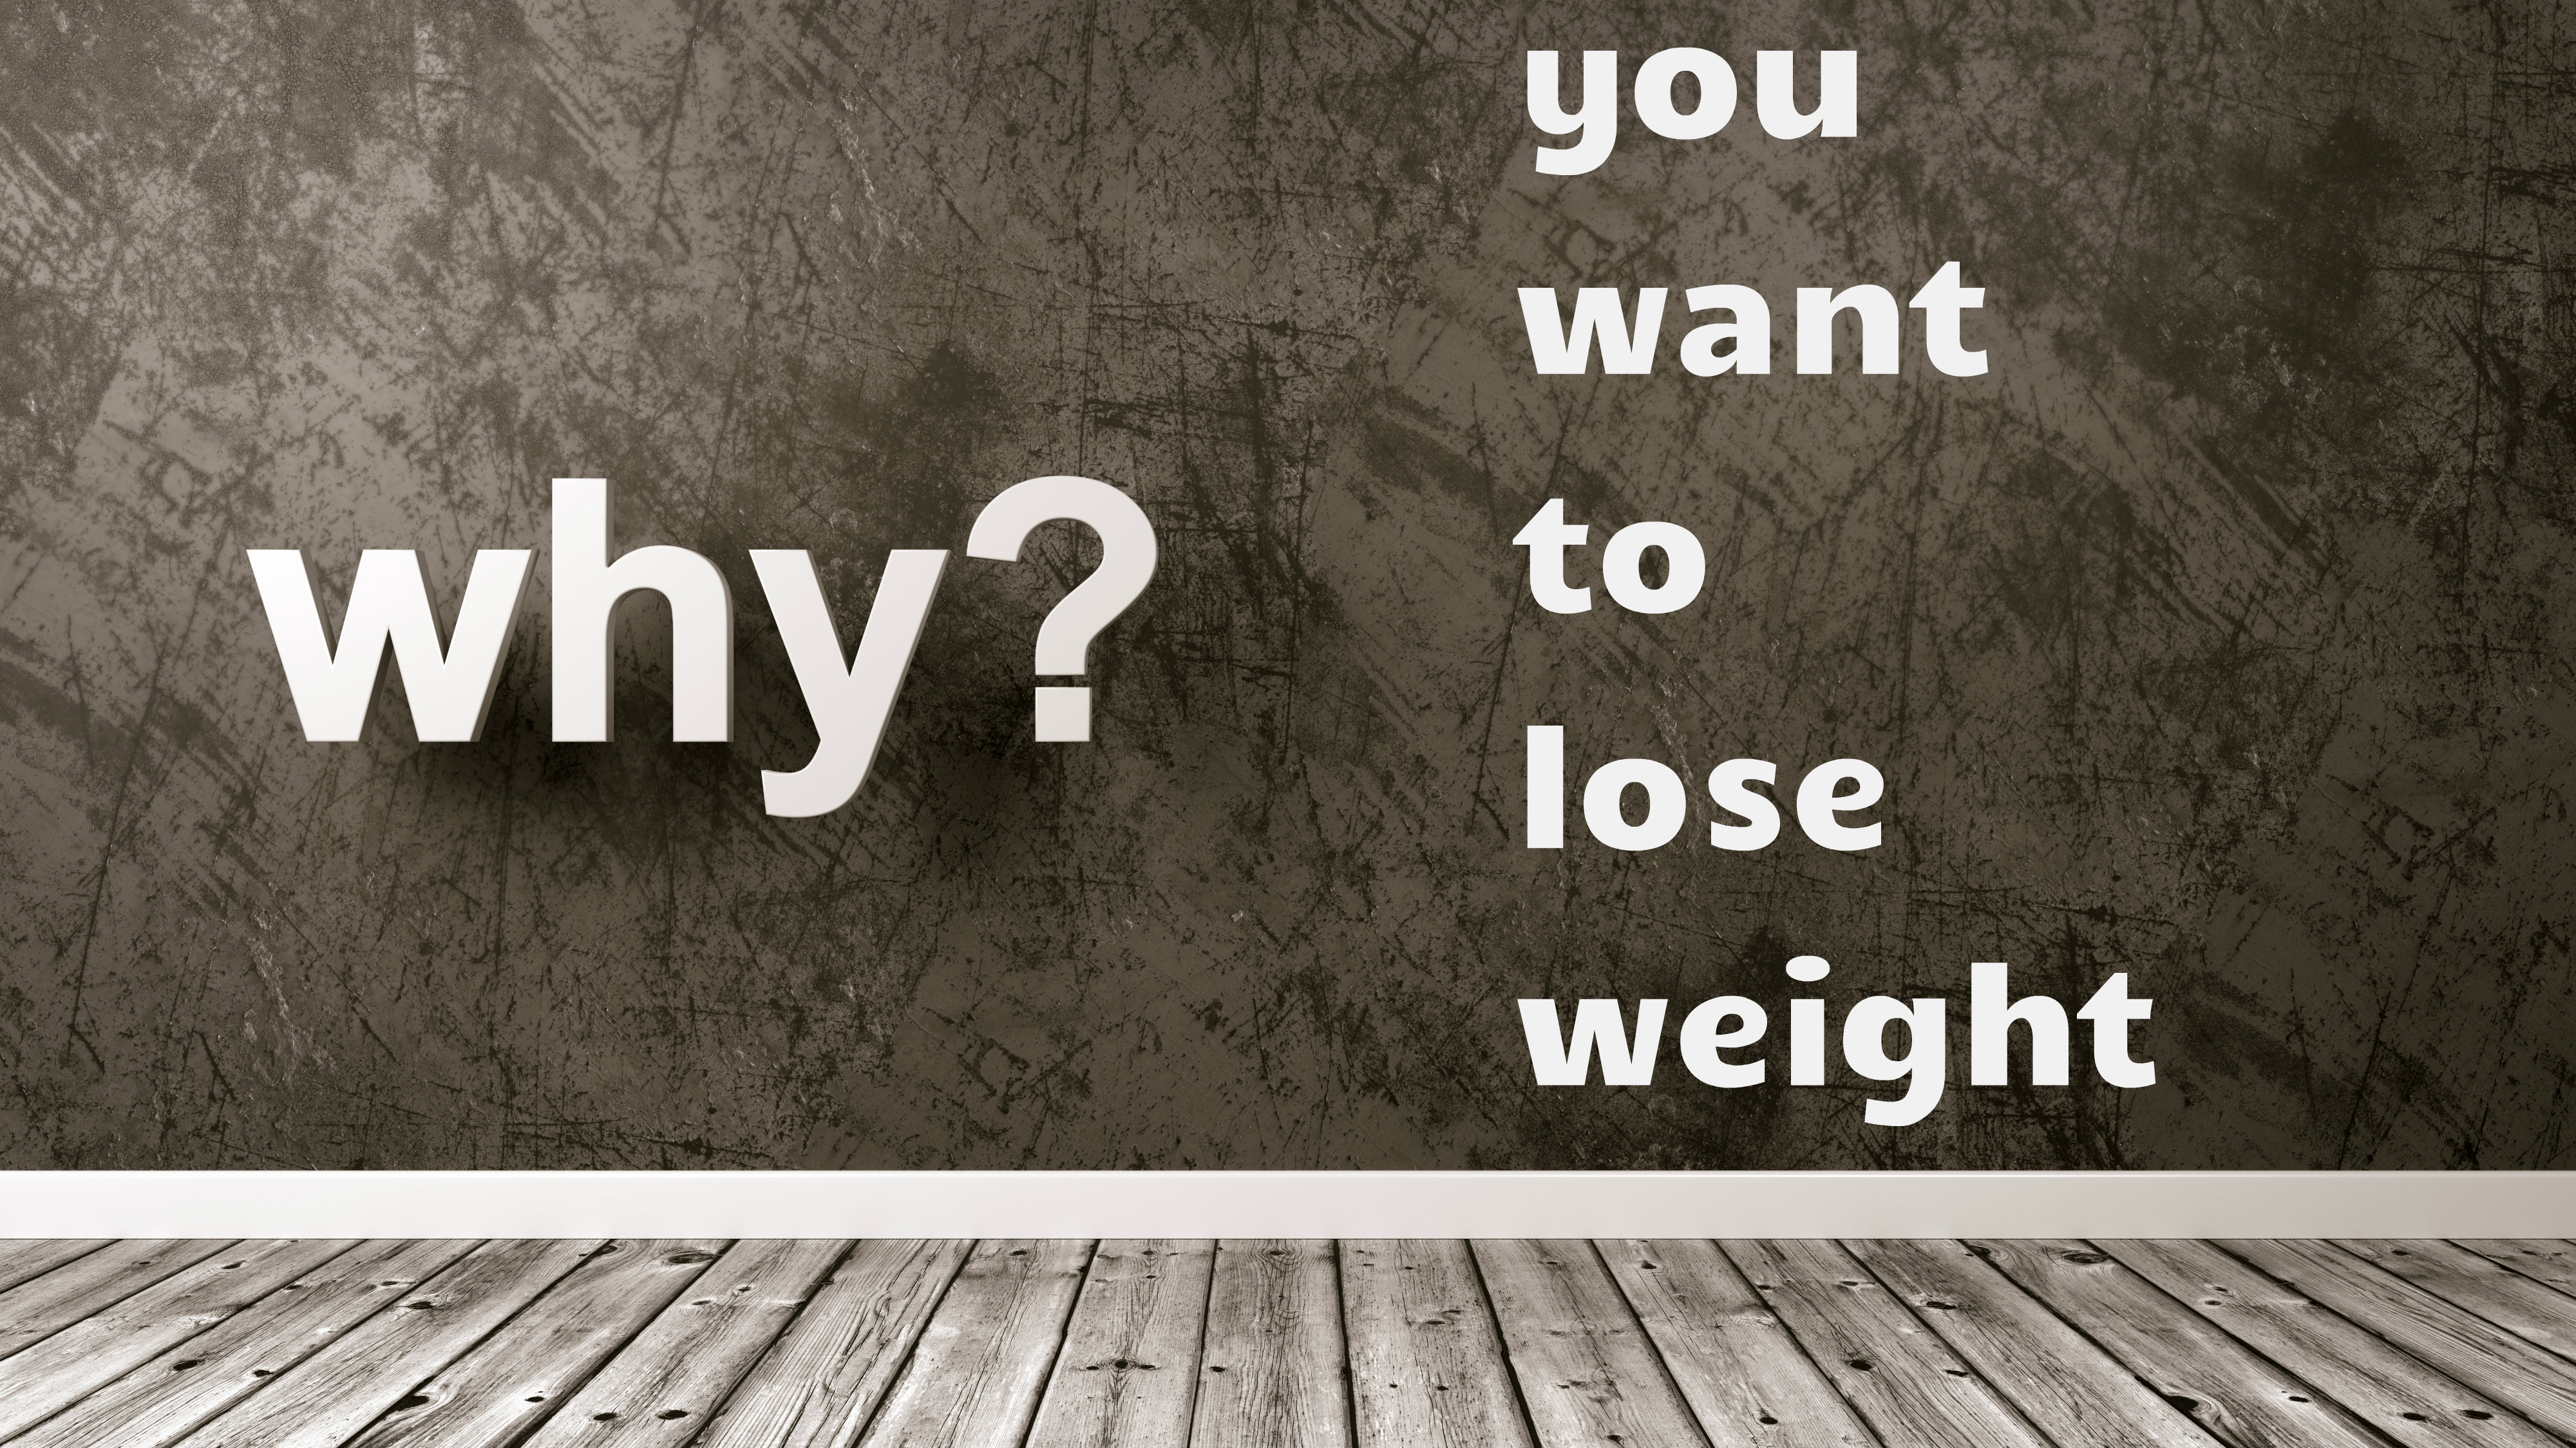 Focus on WHY you want to lose weight